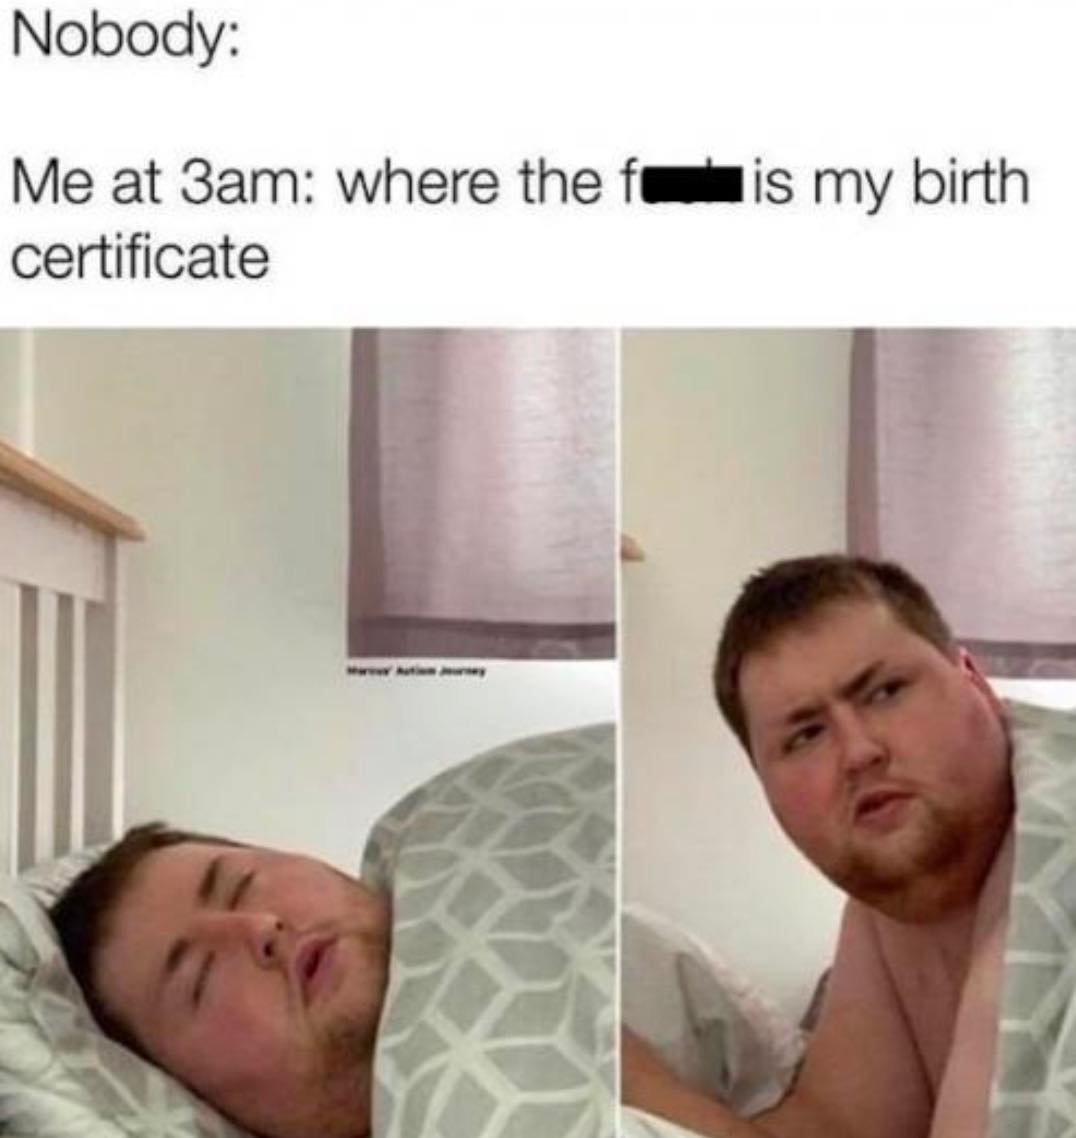 me at 3am where's my birth certificate - Nobody Me at 3am where the fis my birth certificate